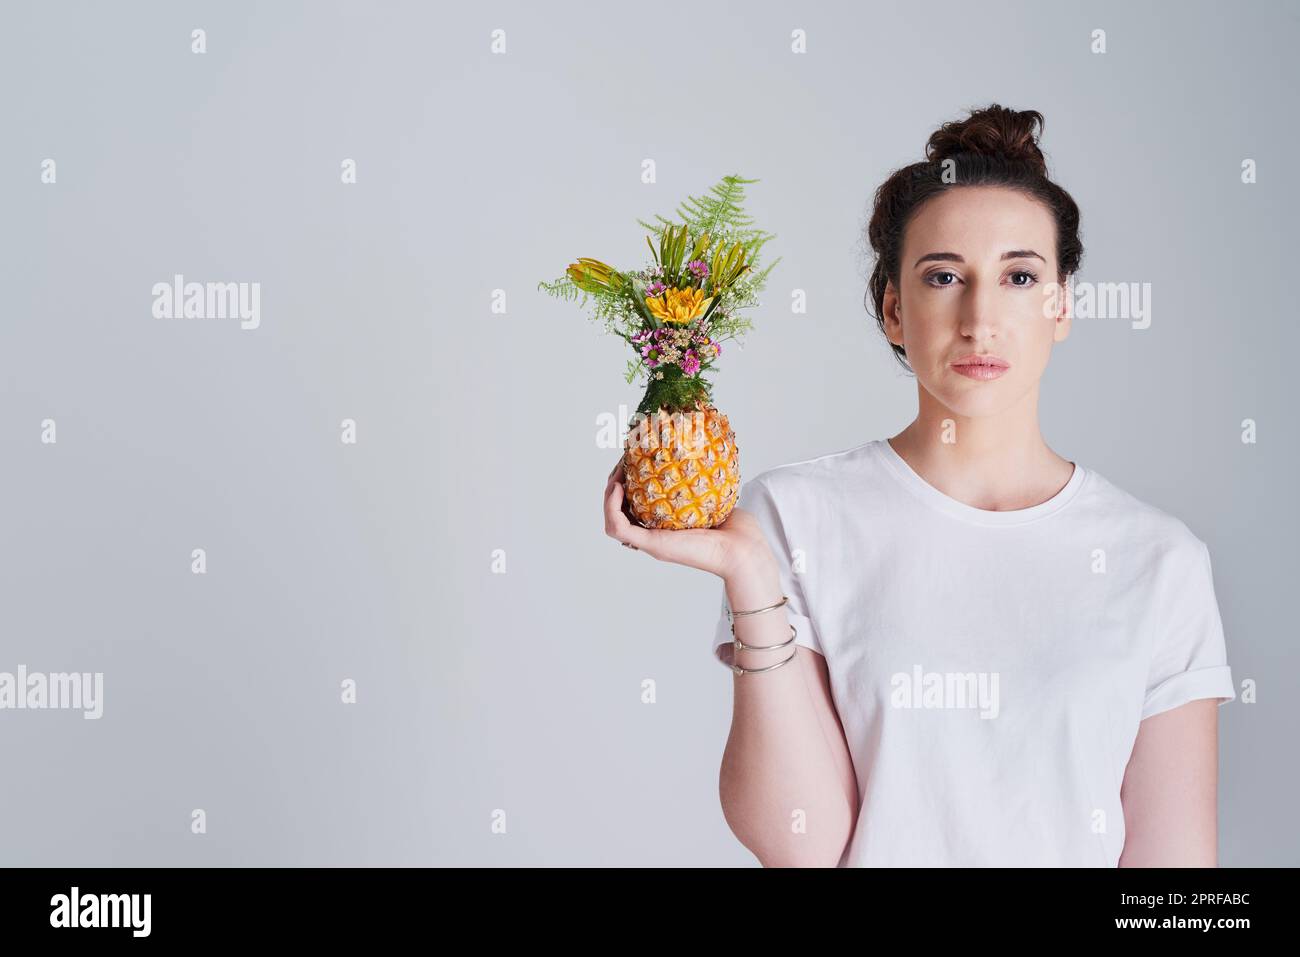 Thats one fineapple you holding there. Studio shot of a beautiful young woman holding a pineapple against a grey background. Stock Photo